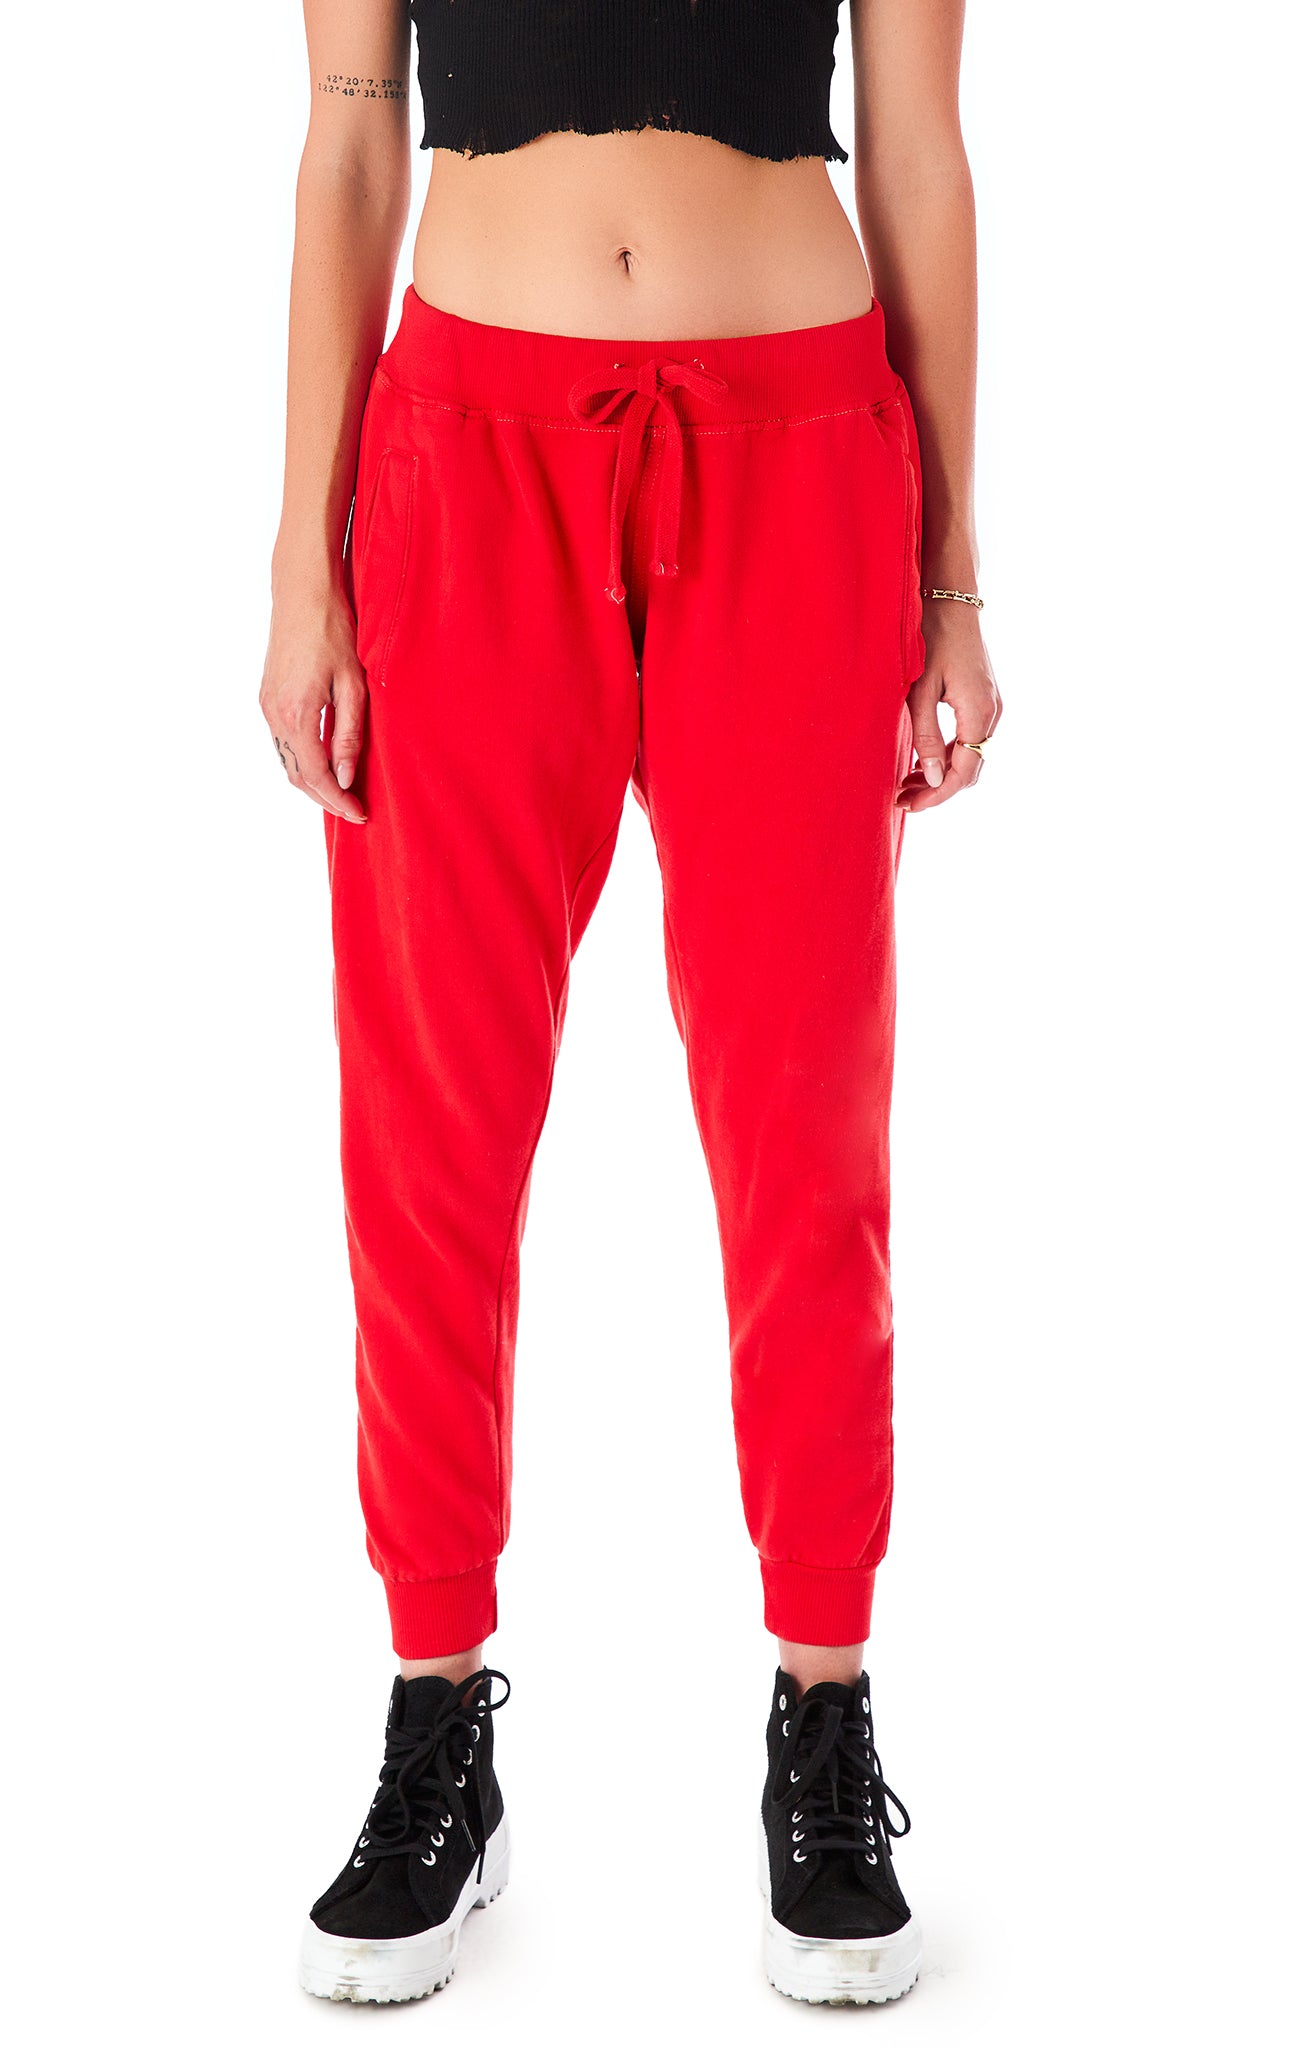 RED SWEATPANTS – LF Stores